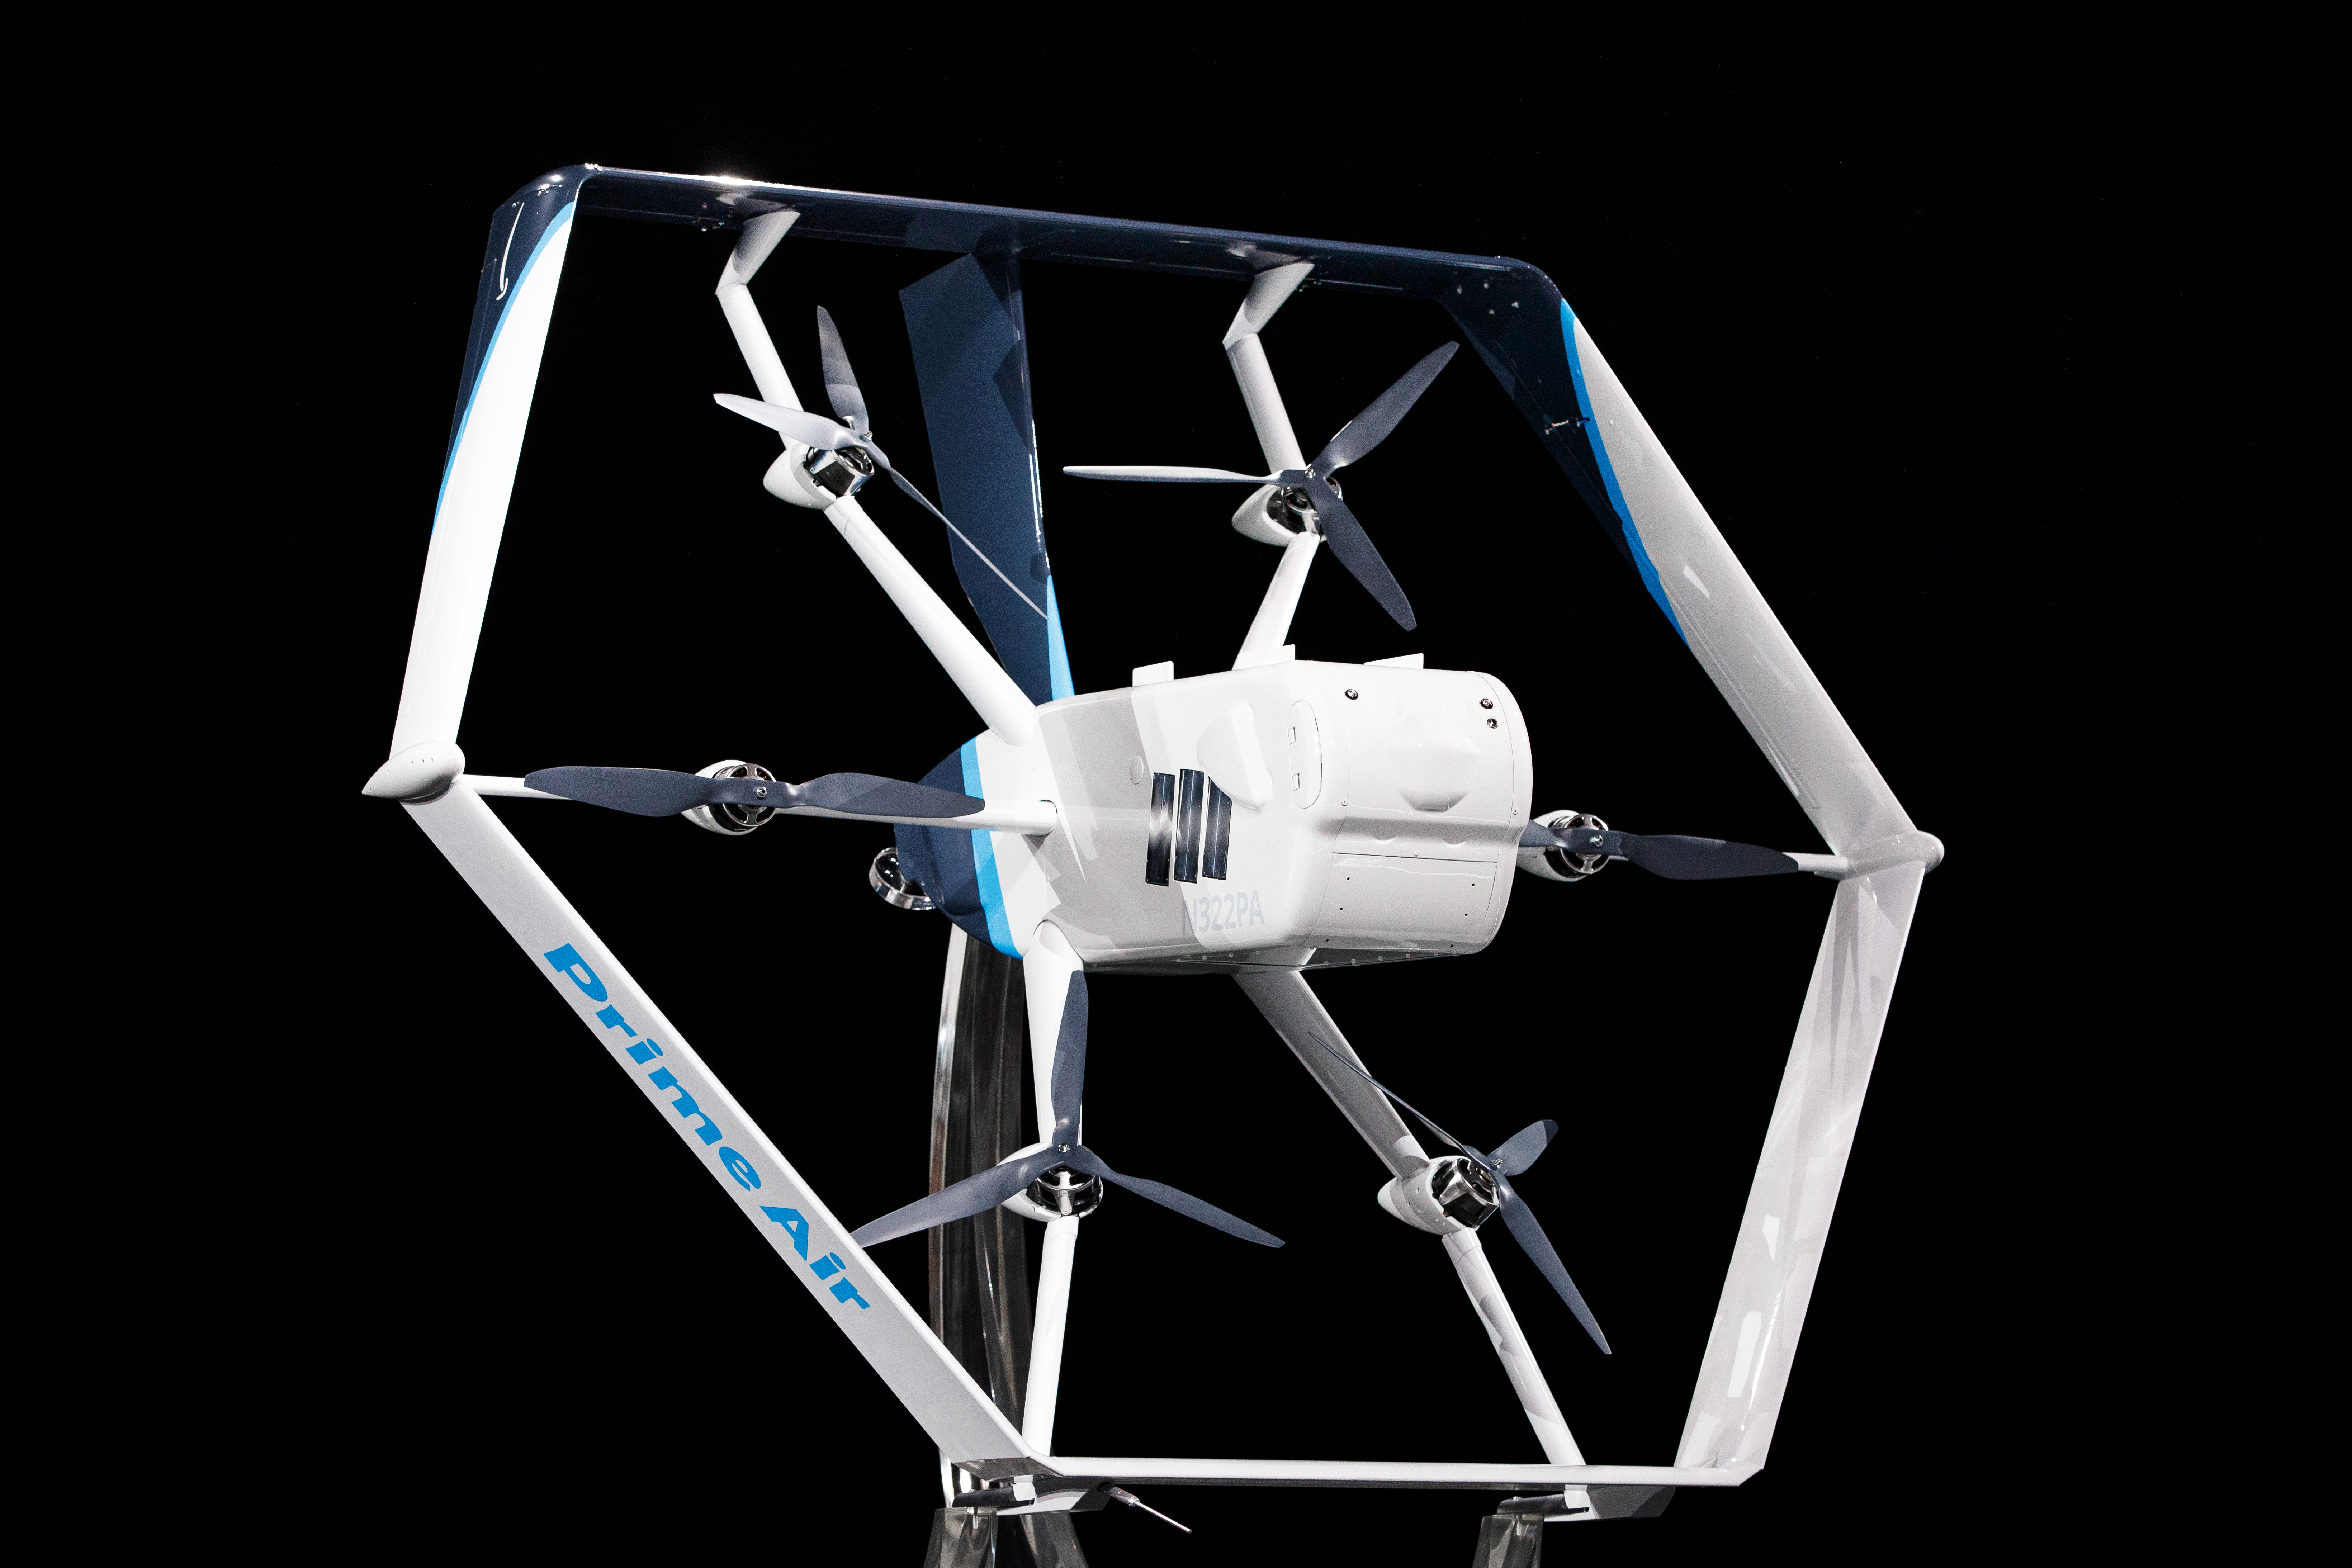 Amazon Prime Air Receives FAA Approval for Drone Deliveries, Unveils New Drone Design